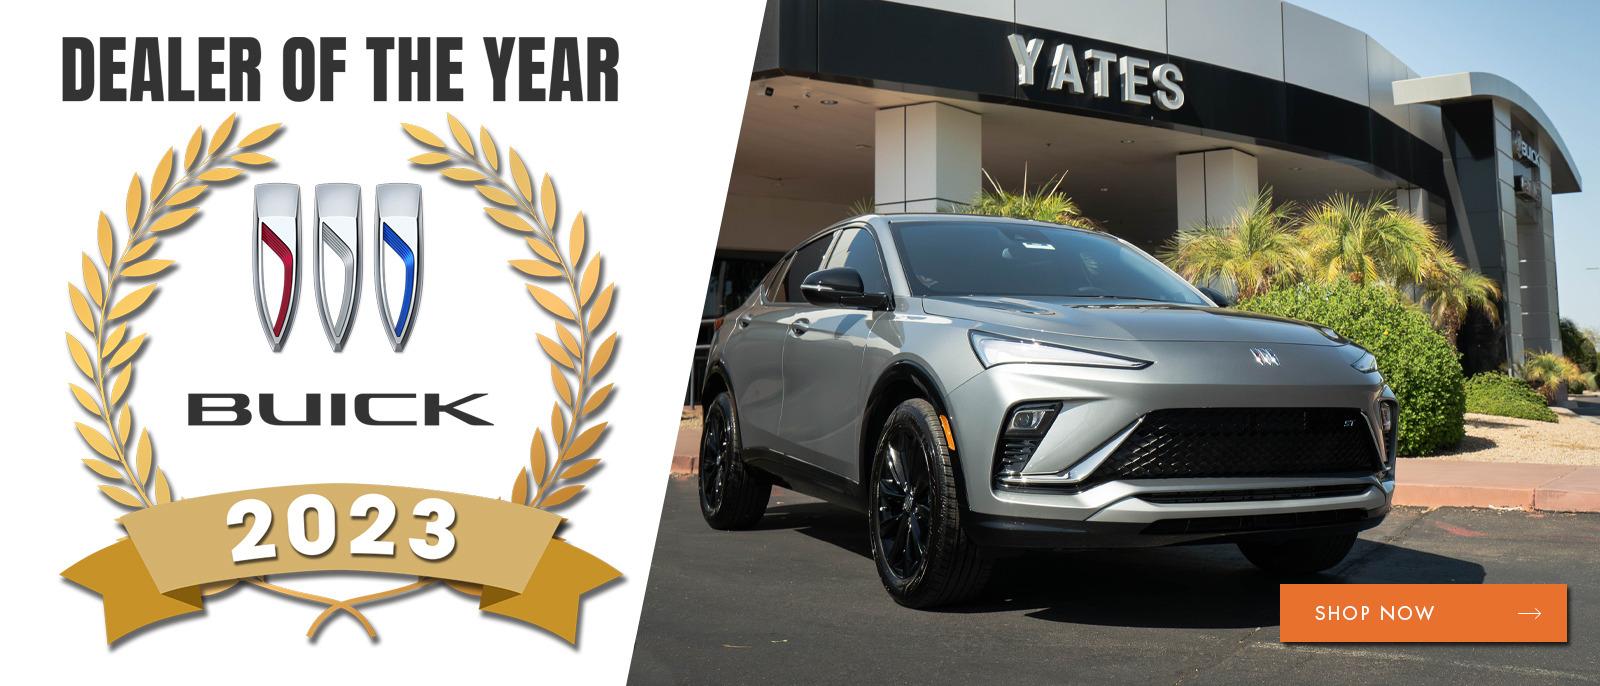 Buick Dealer of the Year